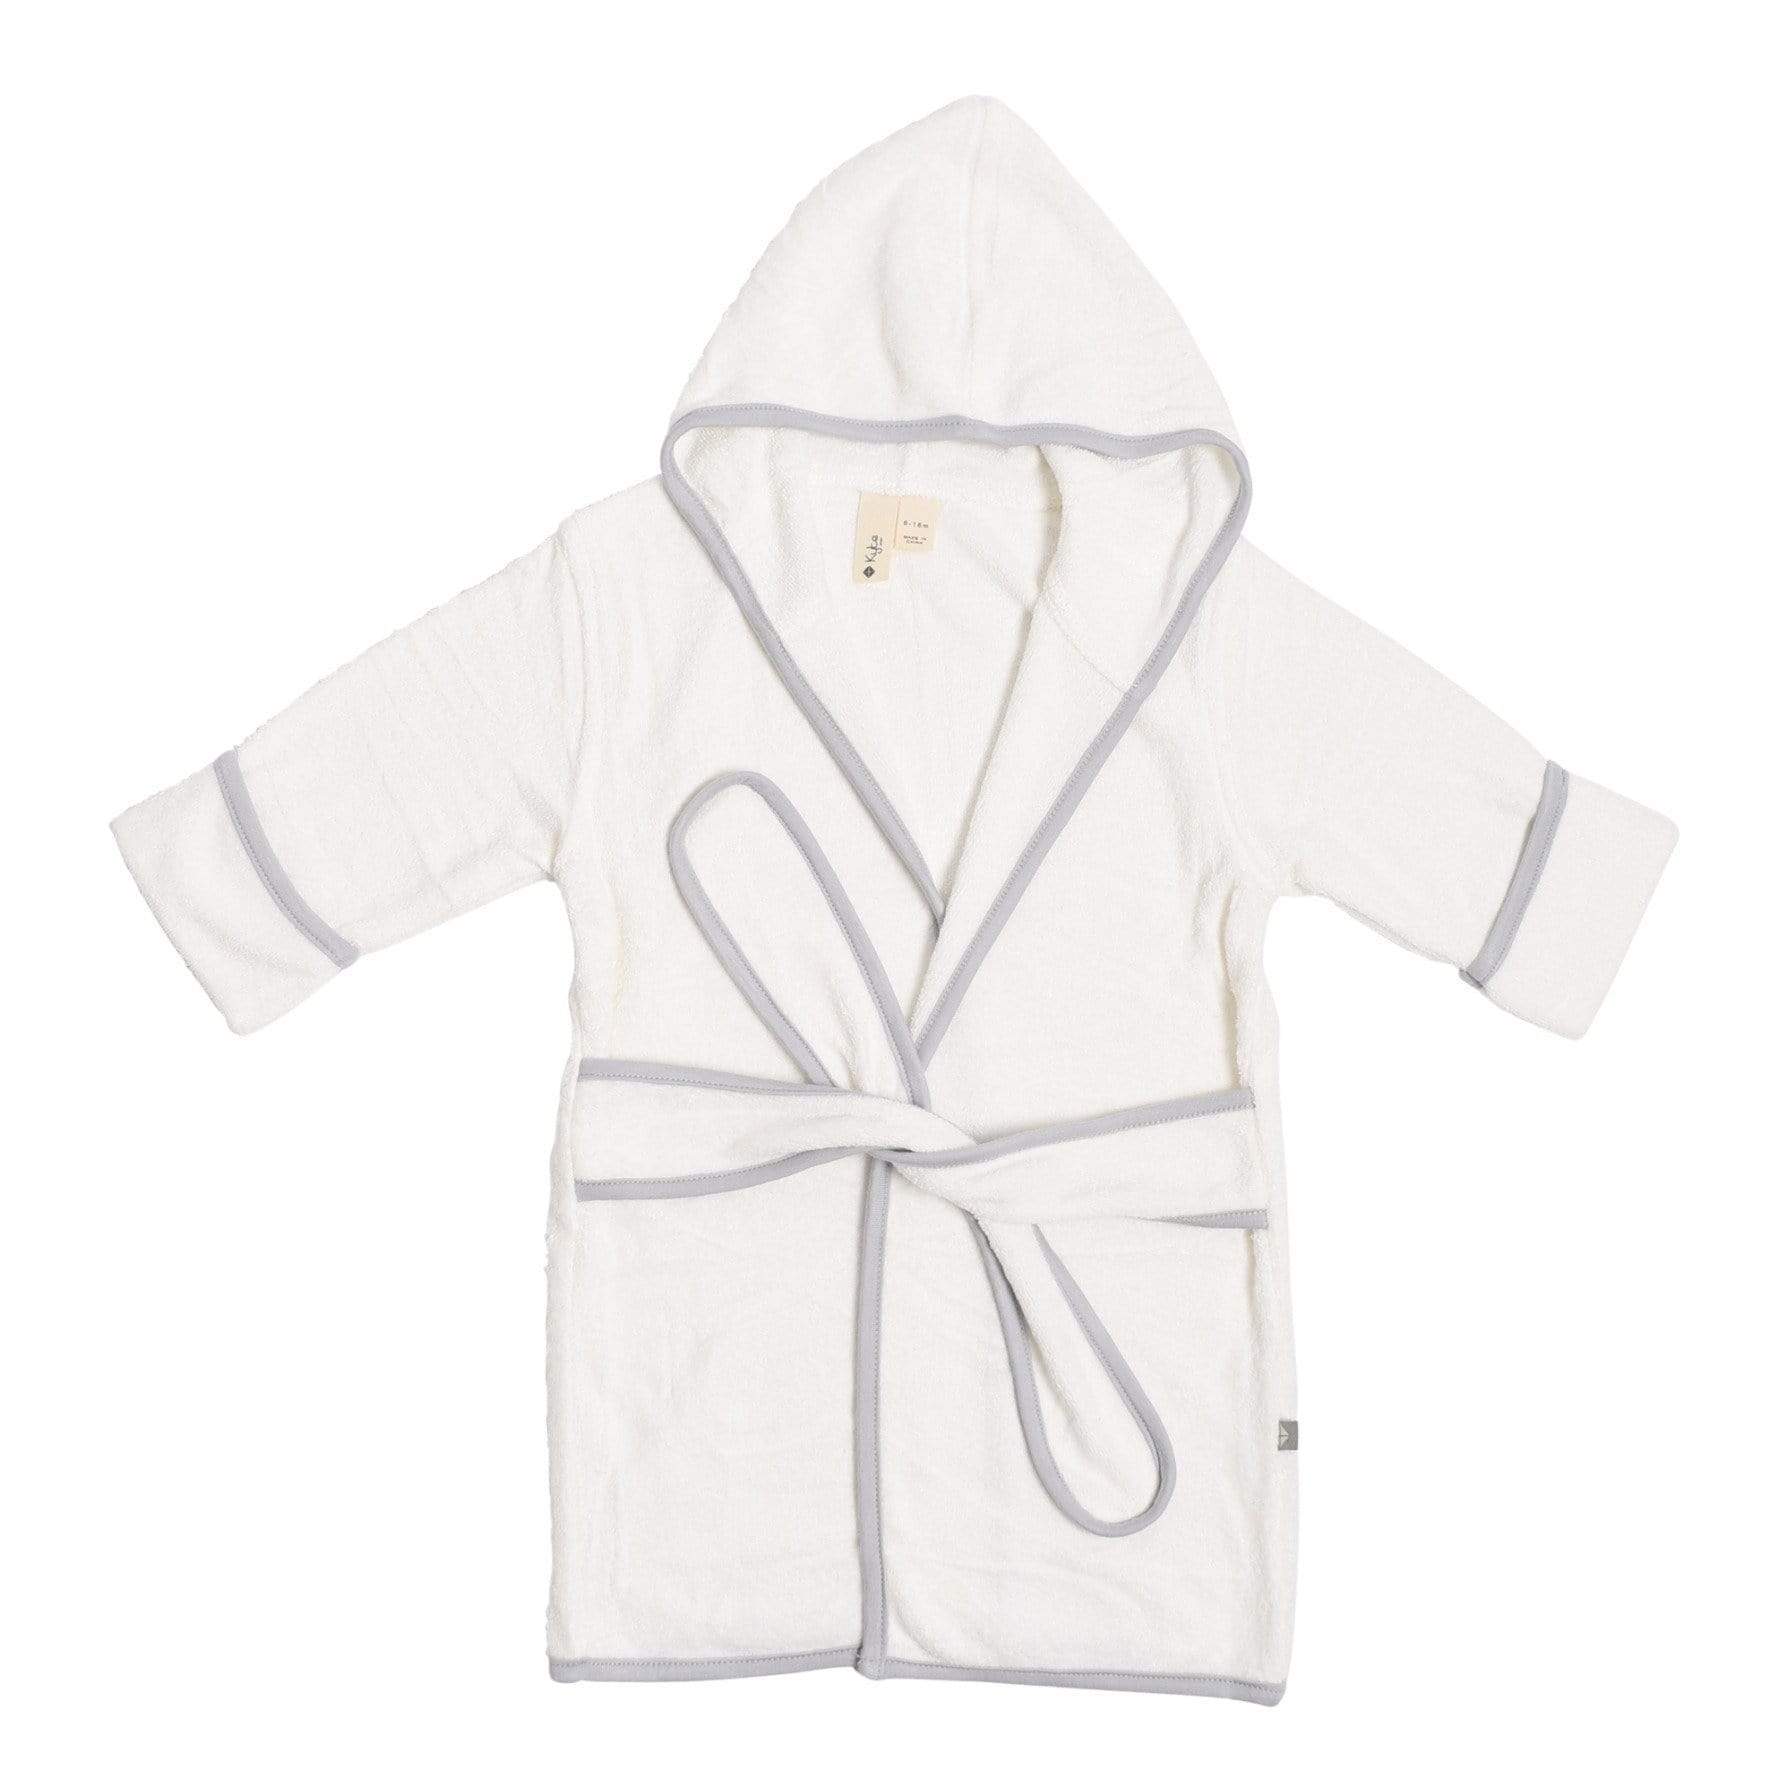 Kyte BABY Home and Bath Cloud with Storm Trim / 6-18 months Toddler Bath Robe in Cloud with Storm Trim